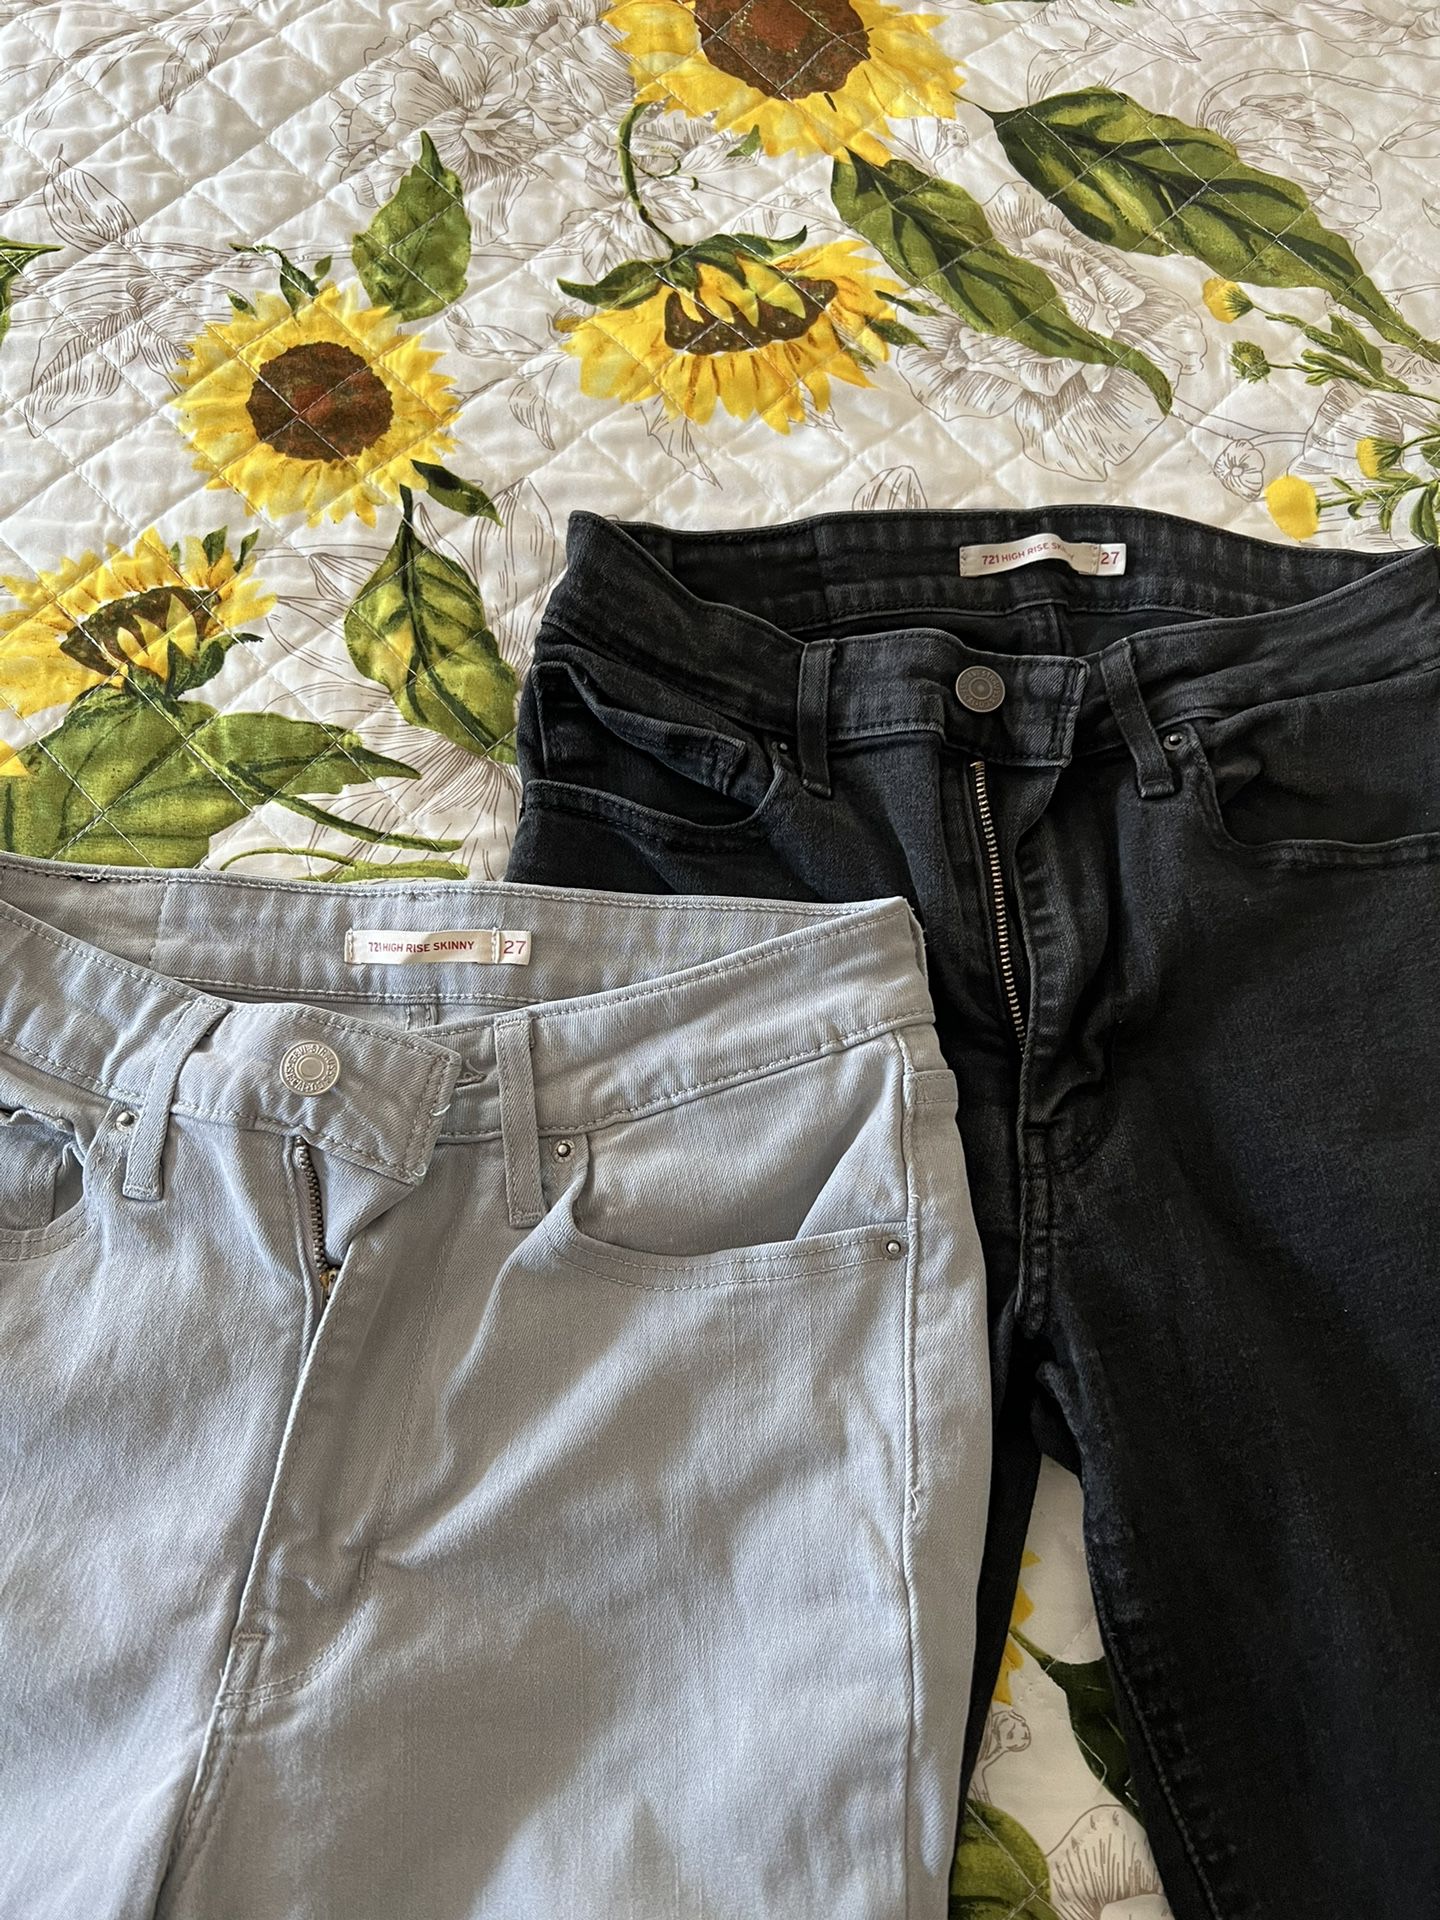 Levi's 721 High Rise Skinny $20 Each for Sale in Long Beach, CA - OfferUp